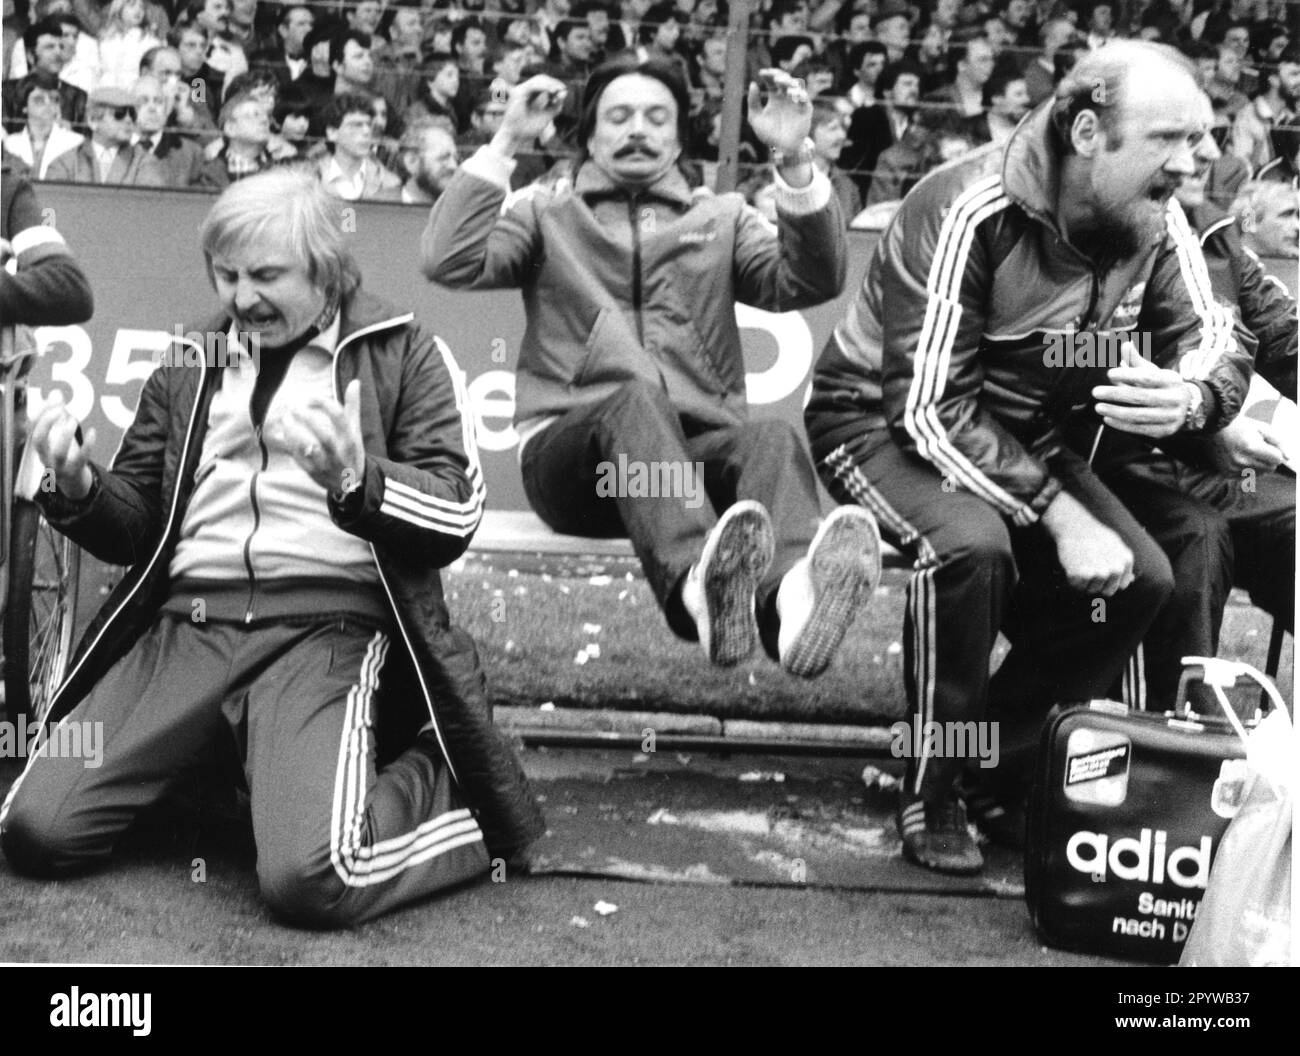 Soccer Bundesliga 1981/82 season. Bayer 04 Leverkusen - MSV Duisburg 08.05.1982. Excitement on the Leverkusen bench. From left: Coach Kentschke, Fred Bockholt and masseur Trzollek. For journalistic use only! Only for editorial use! [automated translation] Stock Photo